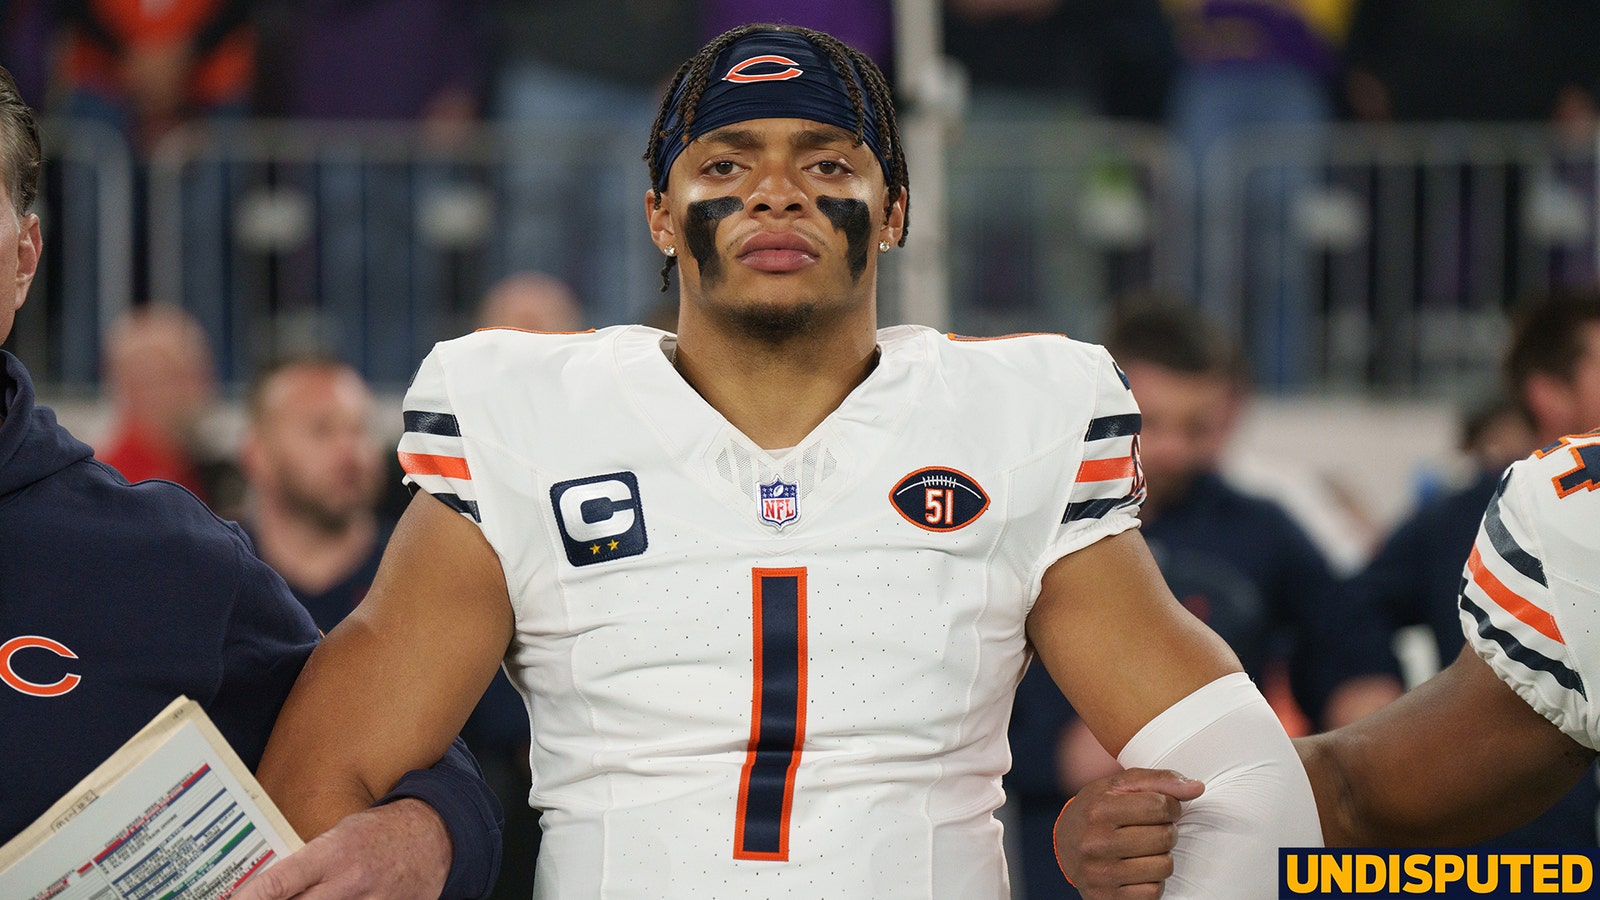 Should Bears stick with Justin Fields or draft USC QB Caleb Williams? 